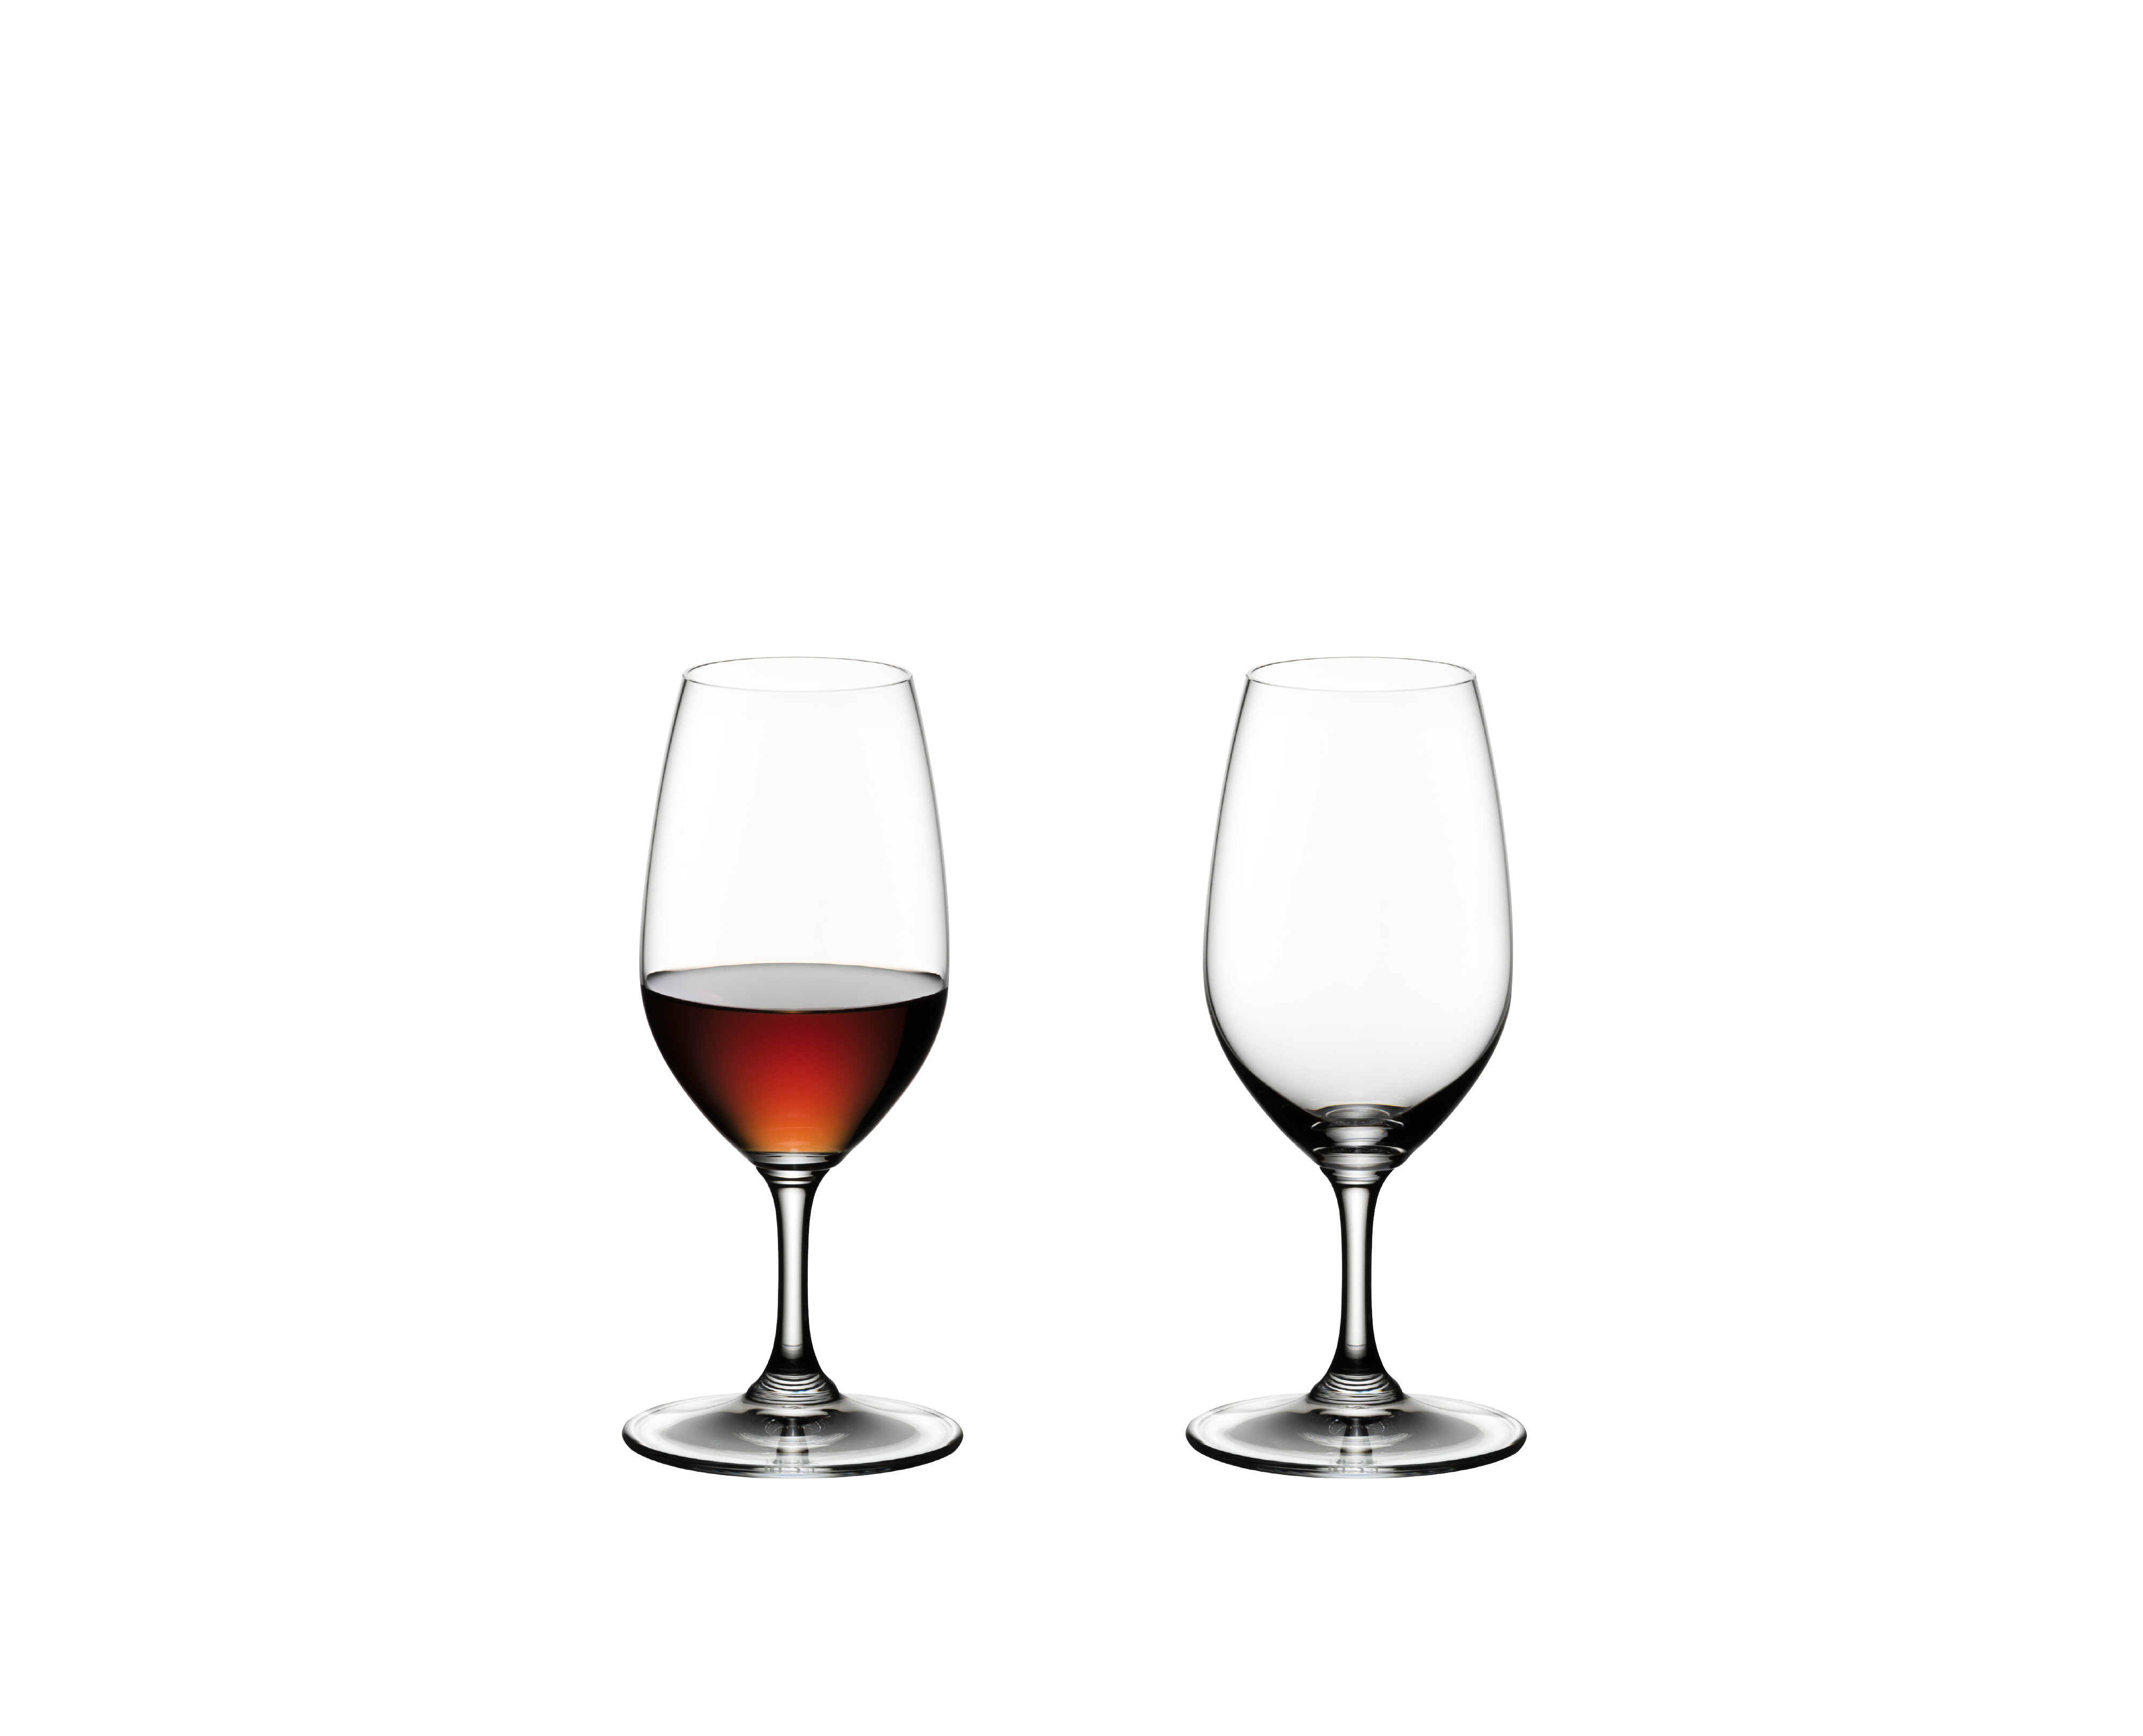 Riedel Vinum Mixed Gift Set, Pay 6-Get 8